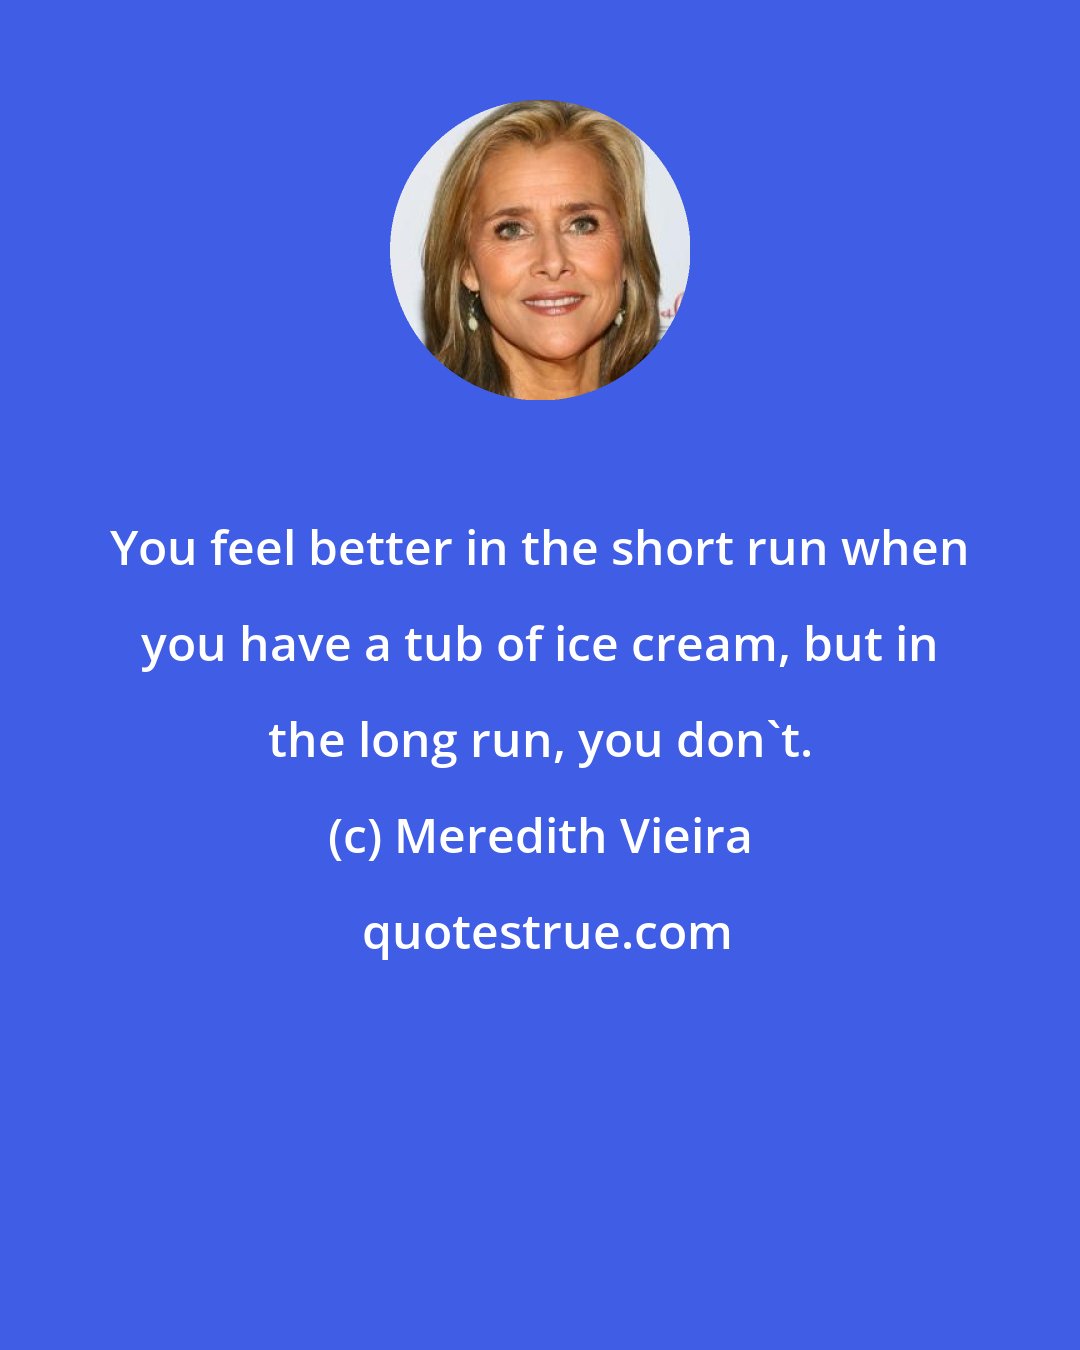 Meredith Vieira: You feel better in the short run when you have a tub of ice cream, but in the long run, you don't.